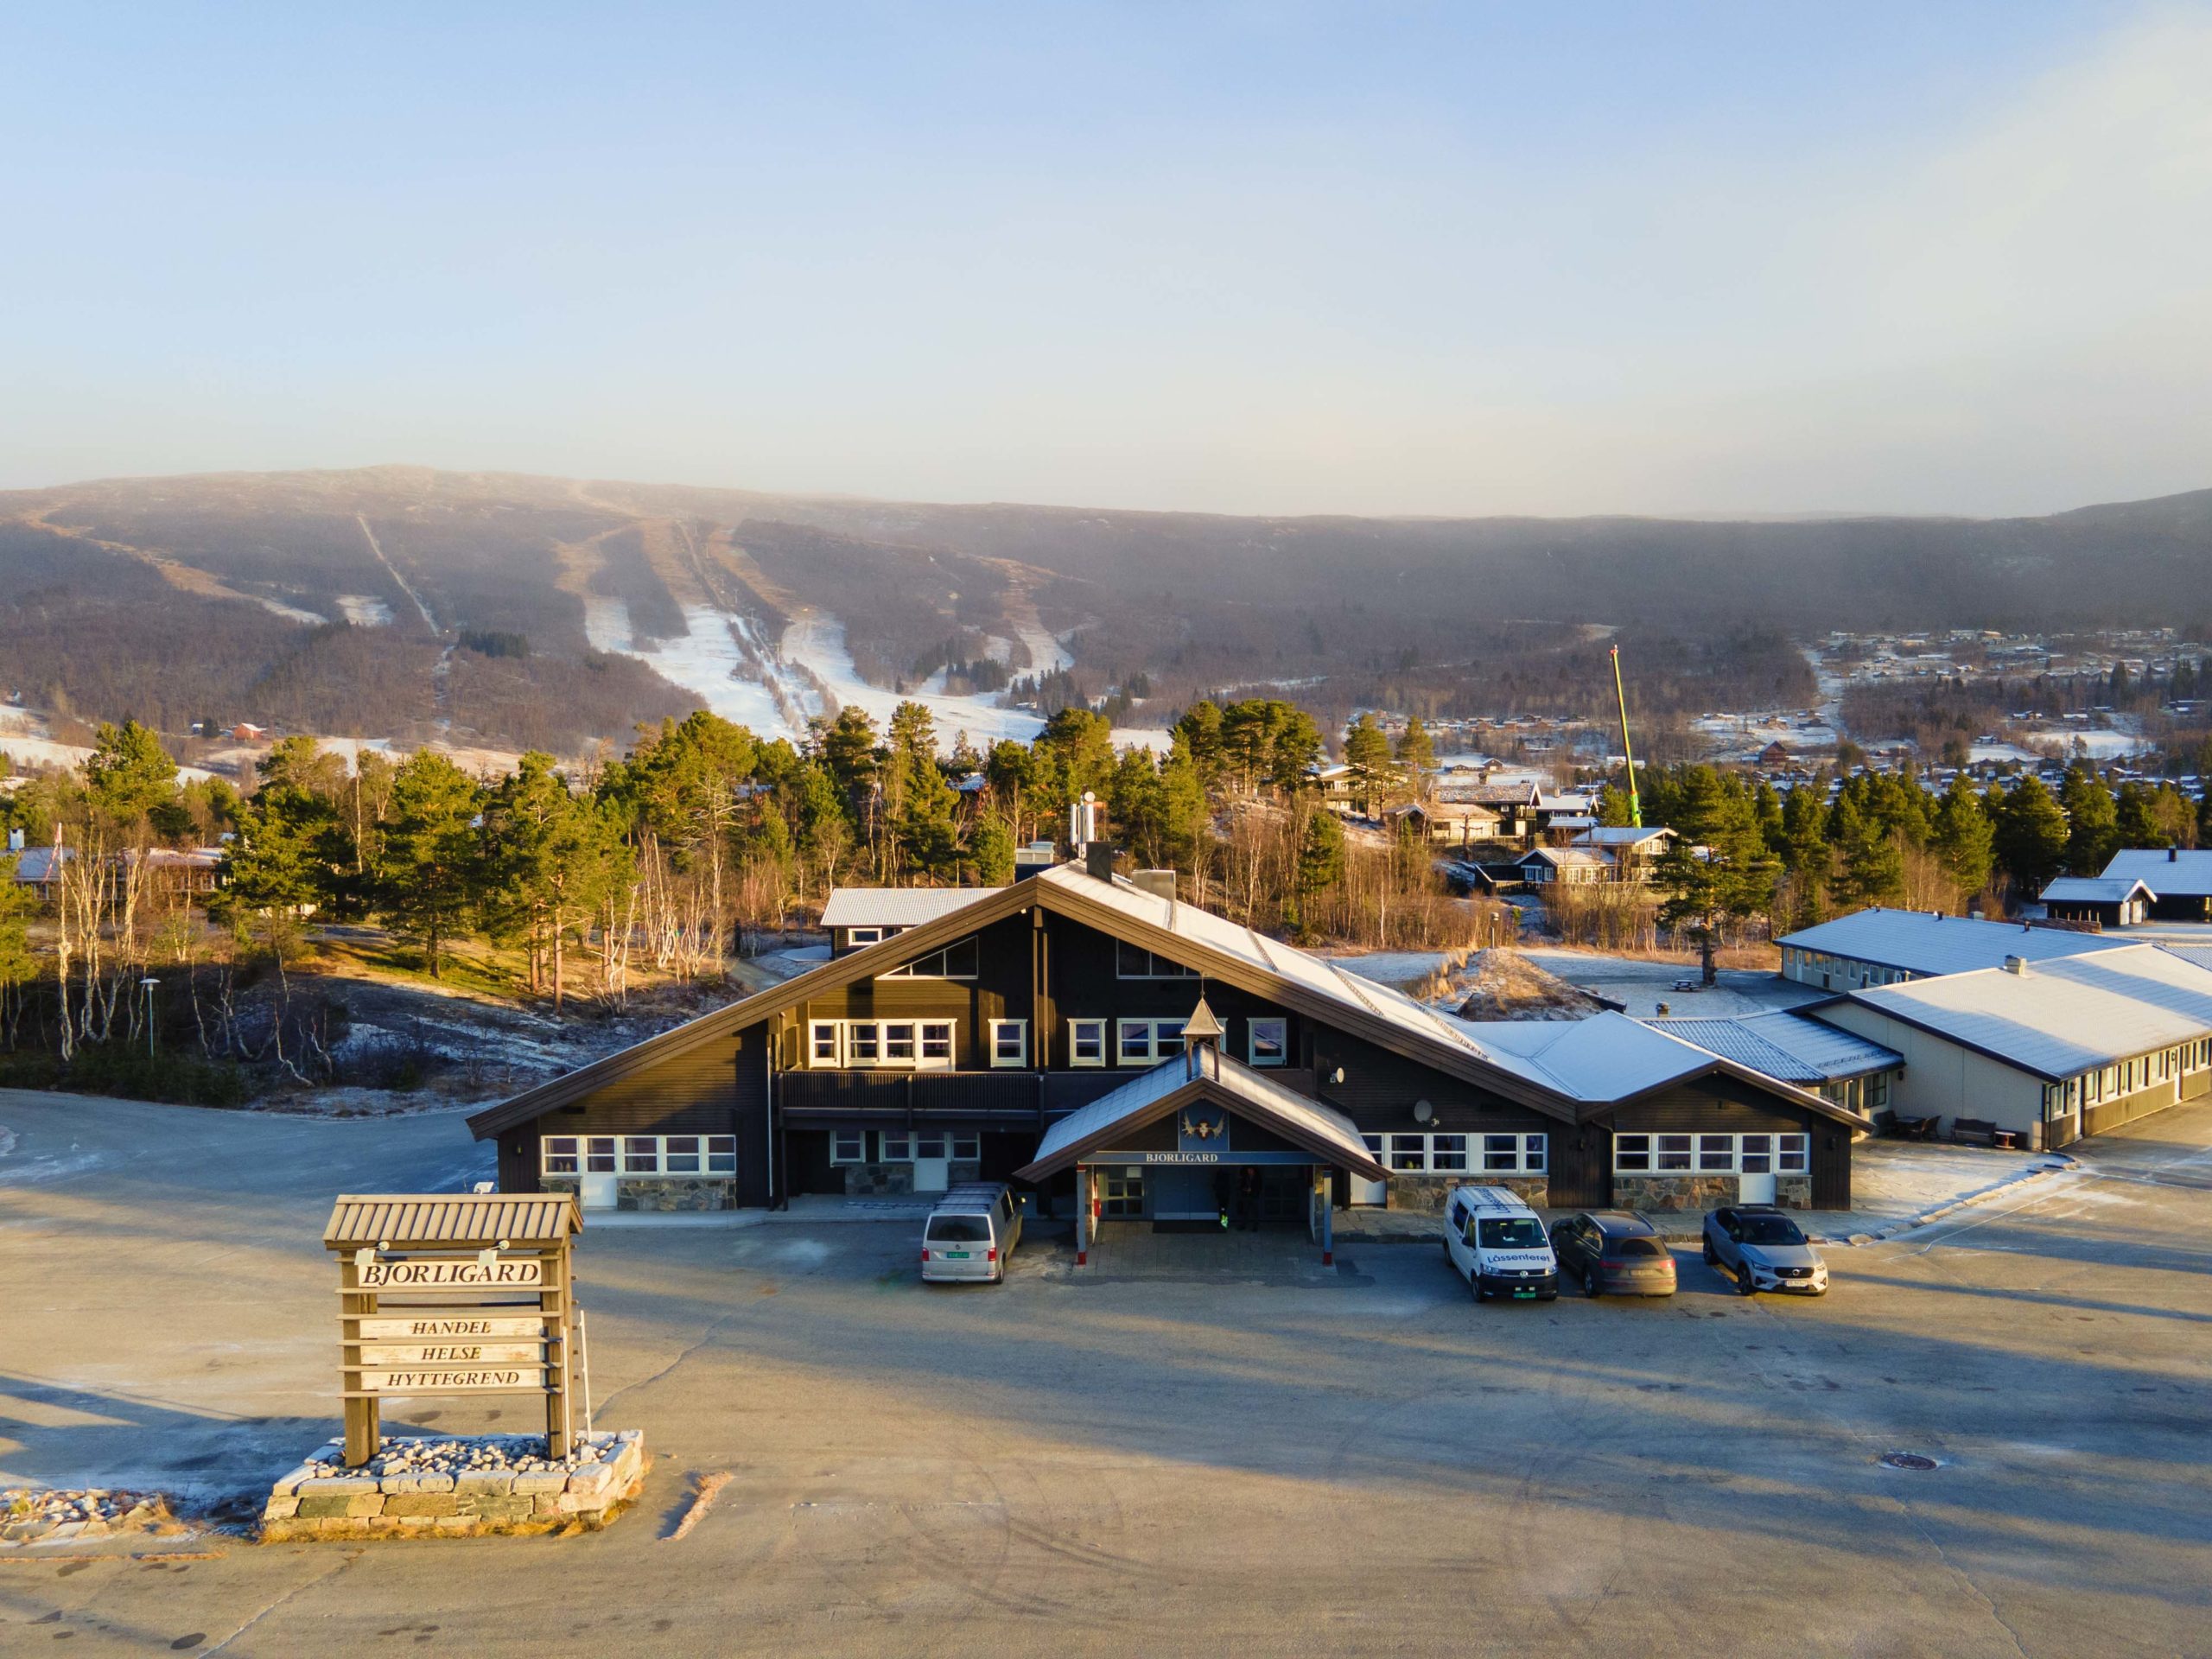 Bjorli Fjellstuer - New self-catering apartments with access to a wellness center.